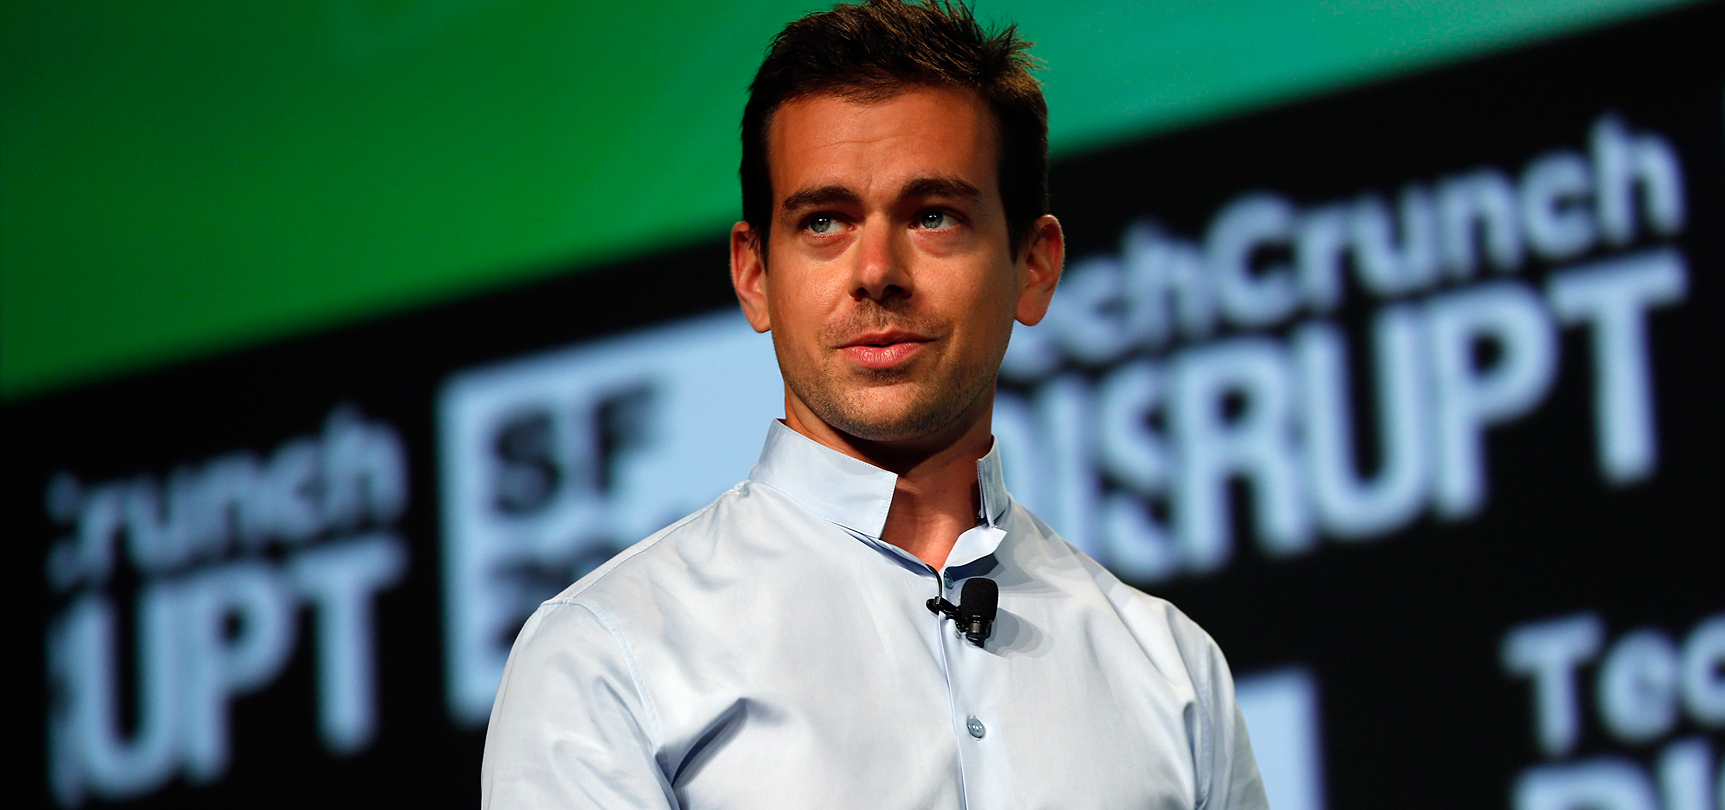 Photo of Jack Dorsey’s Twitter Account Briefly Suspended